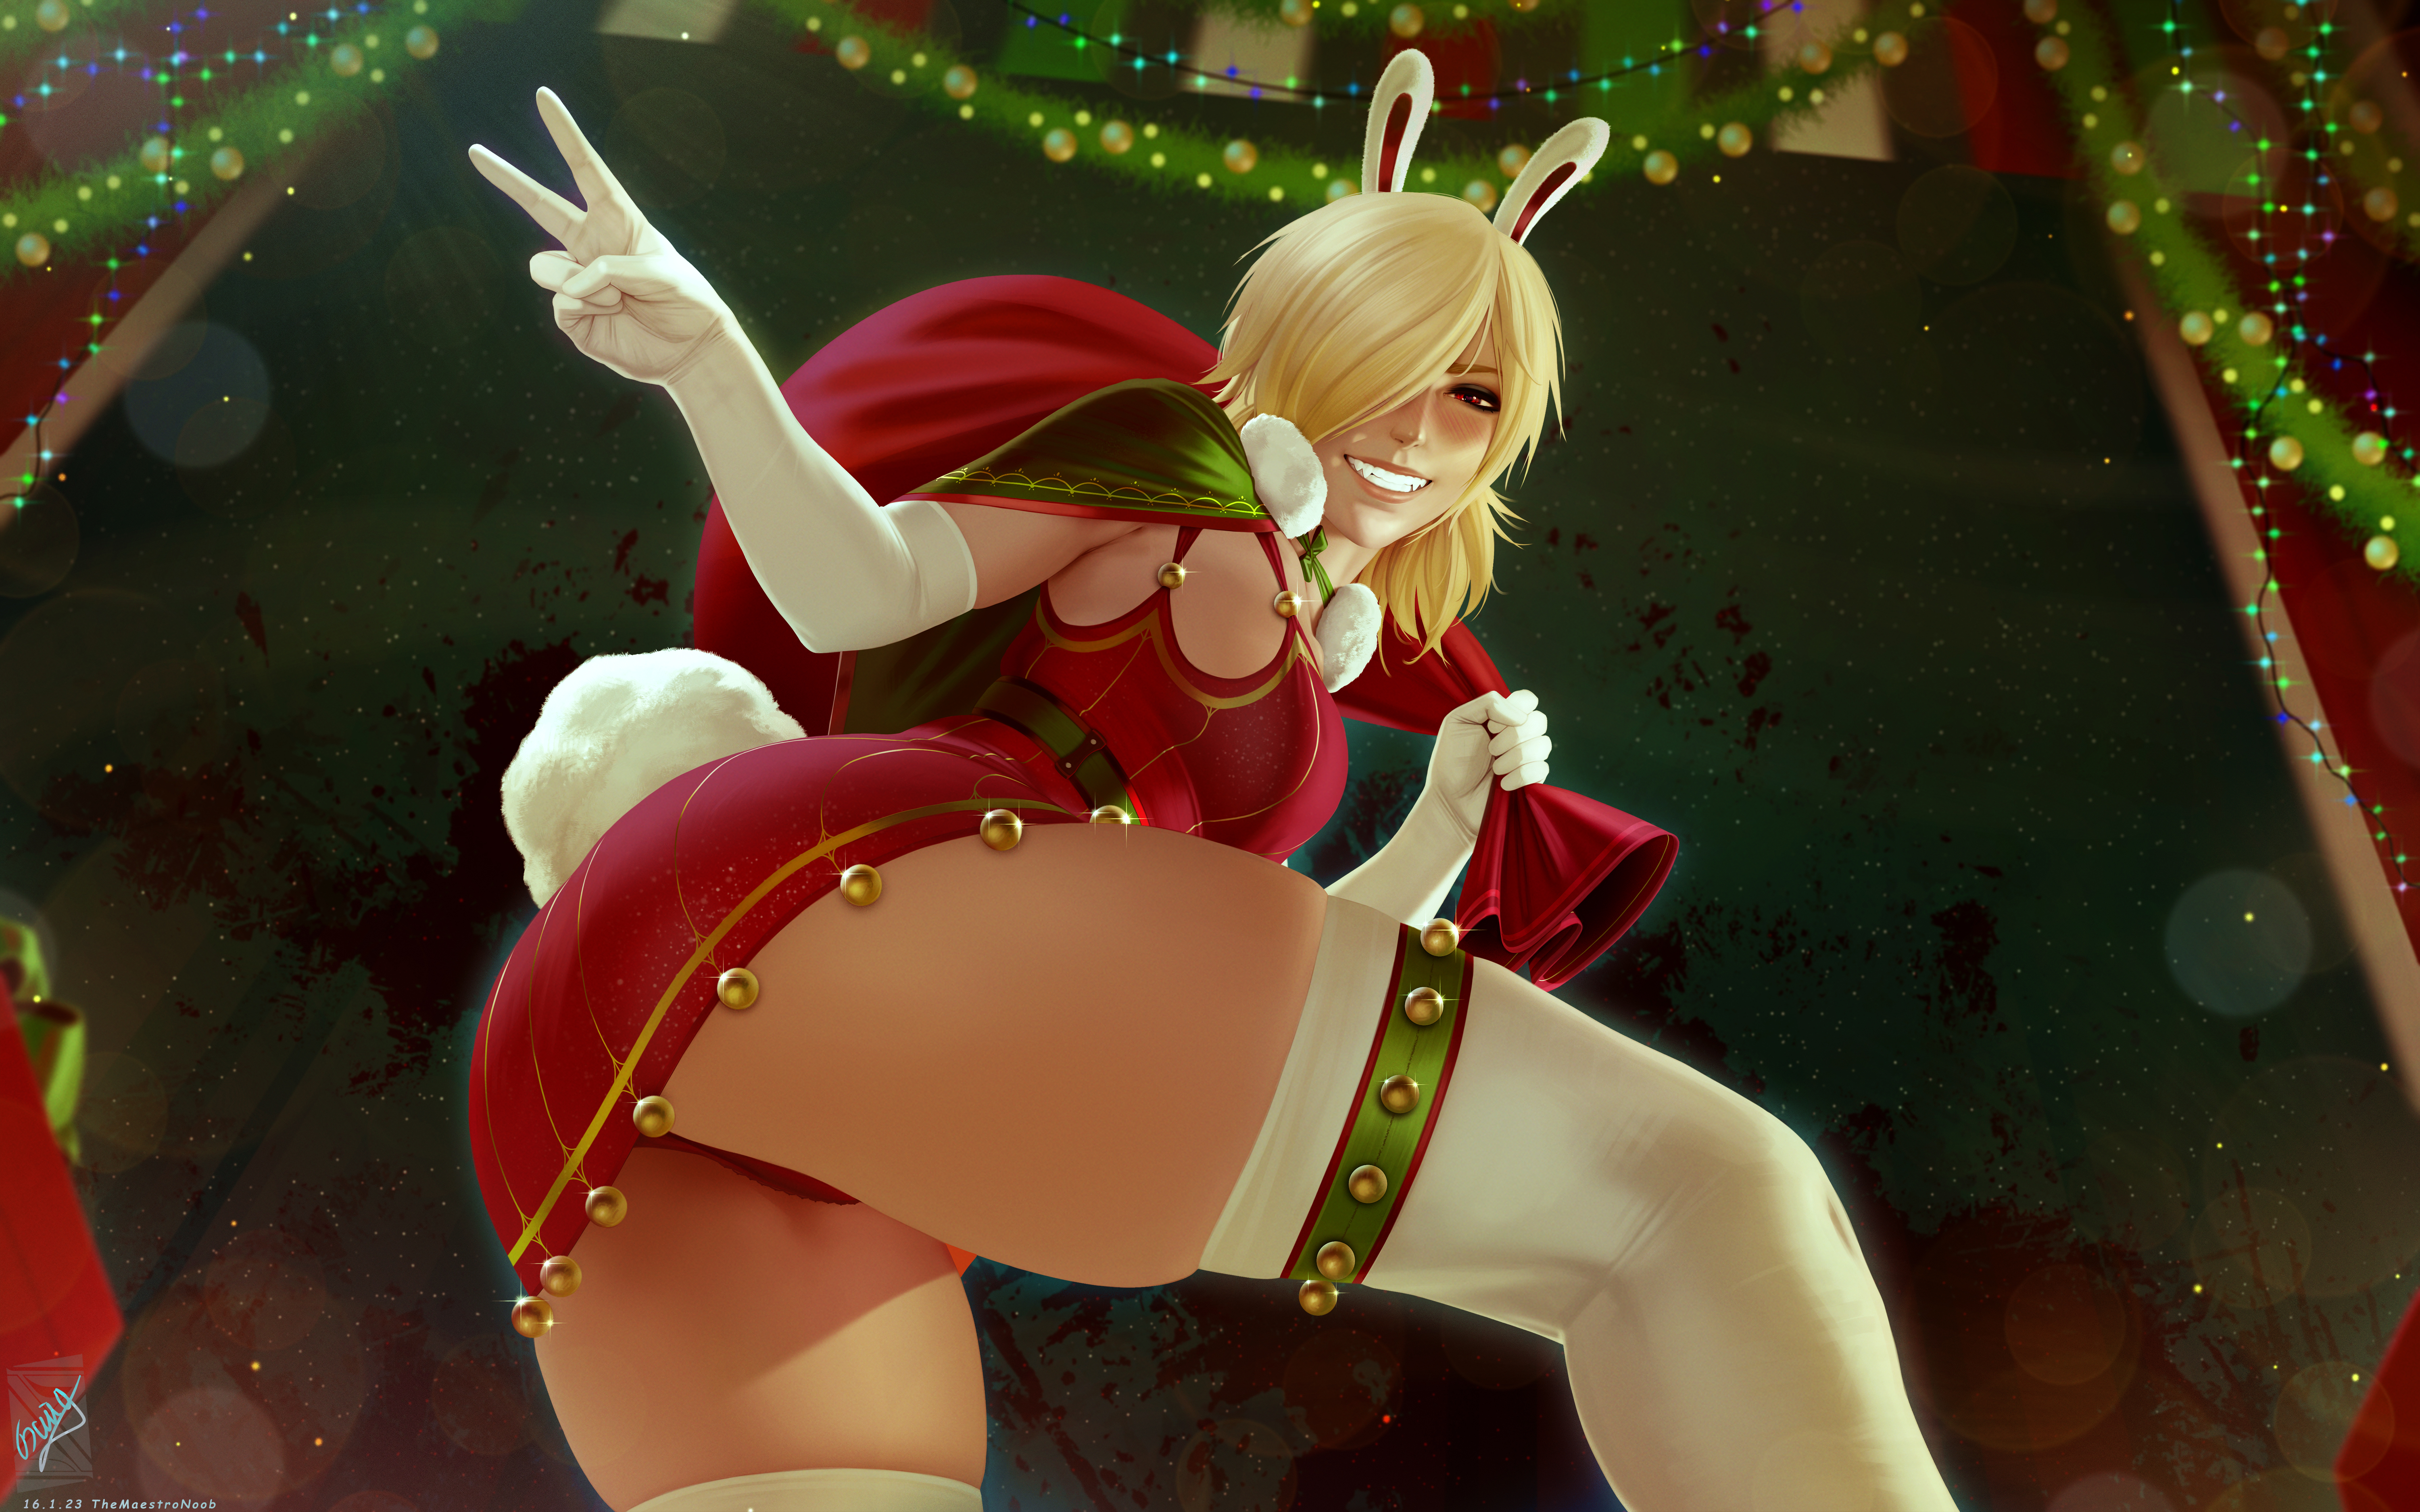 Anime 6000x3750 Seras Victoria Hellsing anime anime girls 2D artwork drawing fan art TheMaestroNoob Christmas Christmas clothes upskirt bunny ears stockings ass red panties thighs elbow gloves low-angle peace sign bunny tail hair over one eye Christmas presents